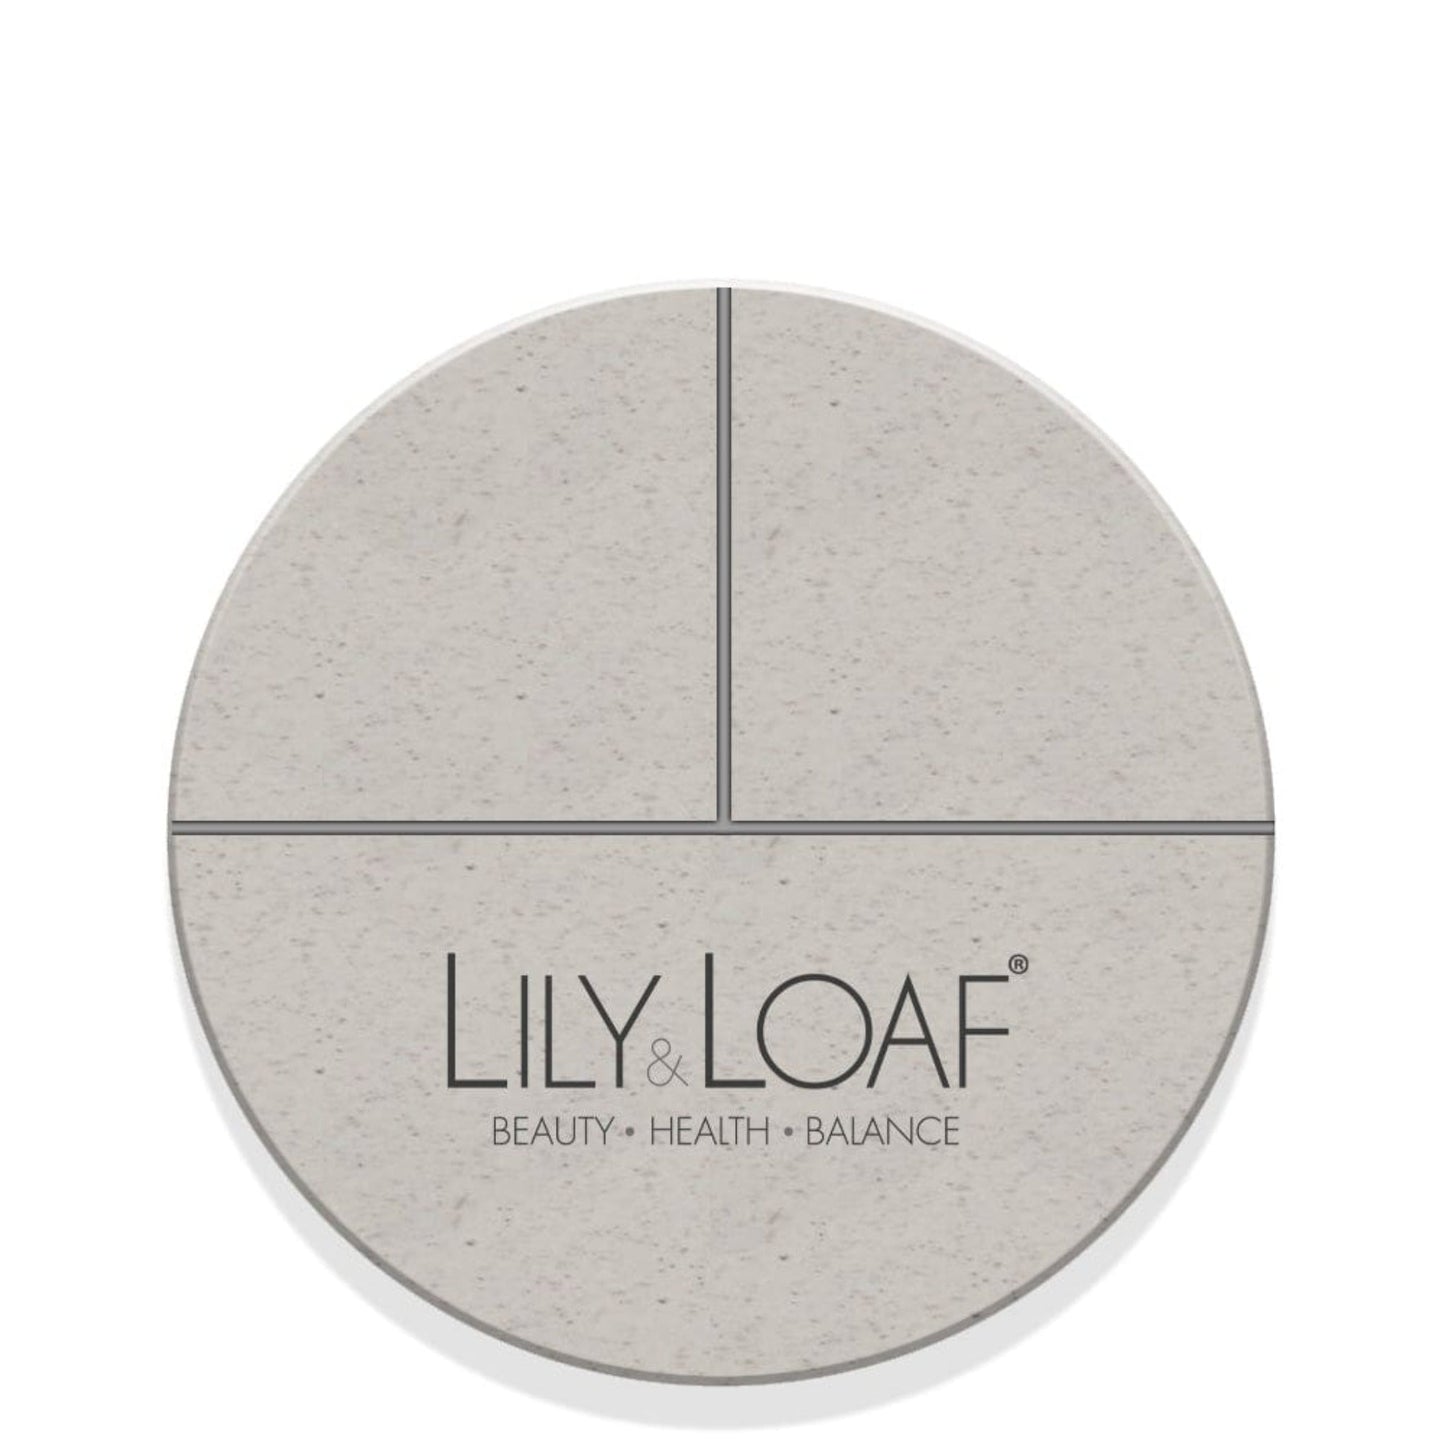 Lily & Loaf Capsule Box with 3 compartments and the Lily & Loaf logo